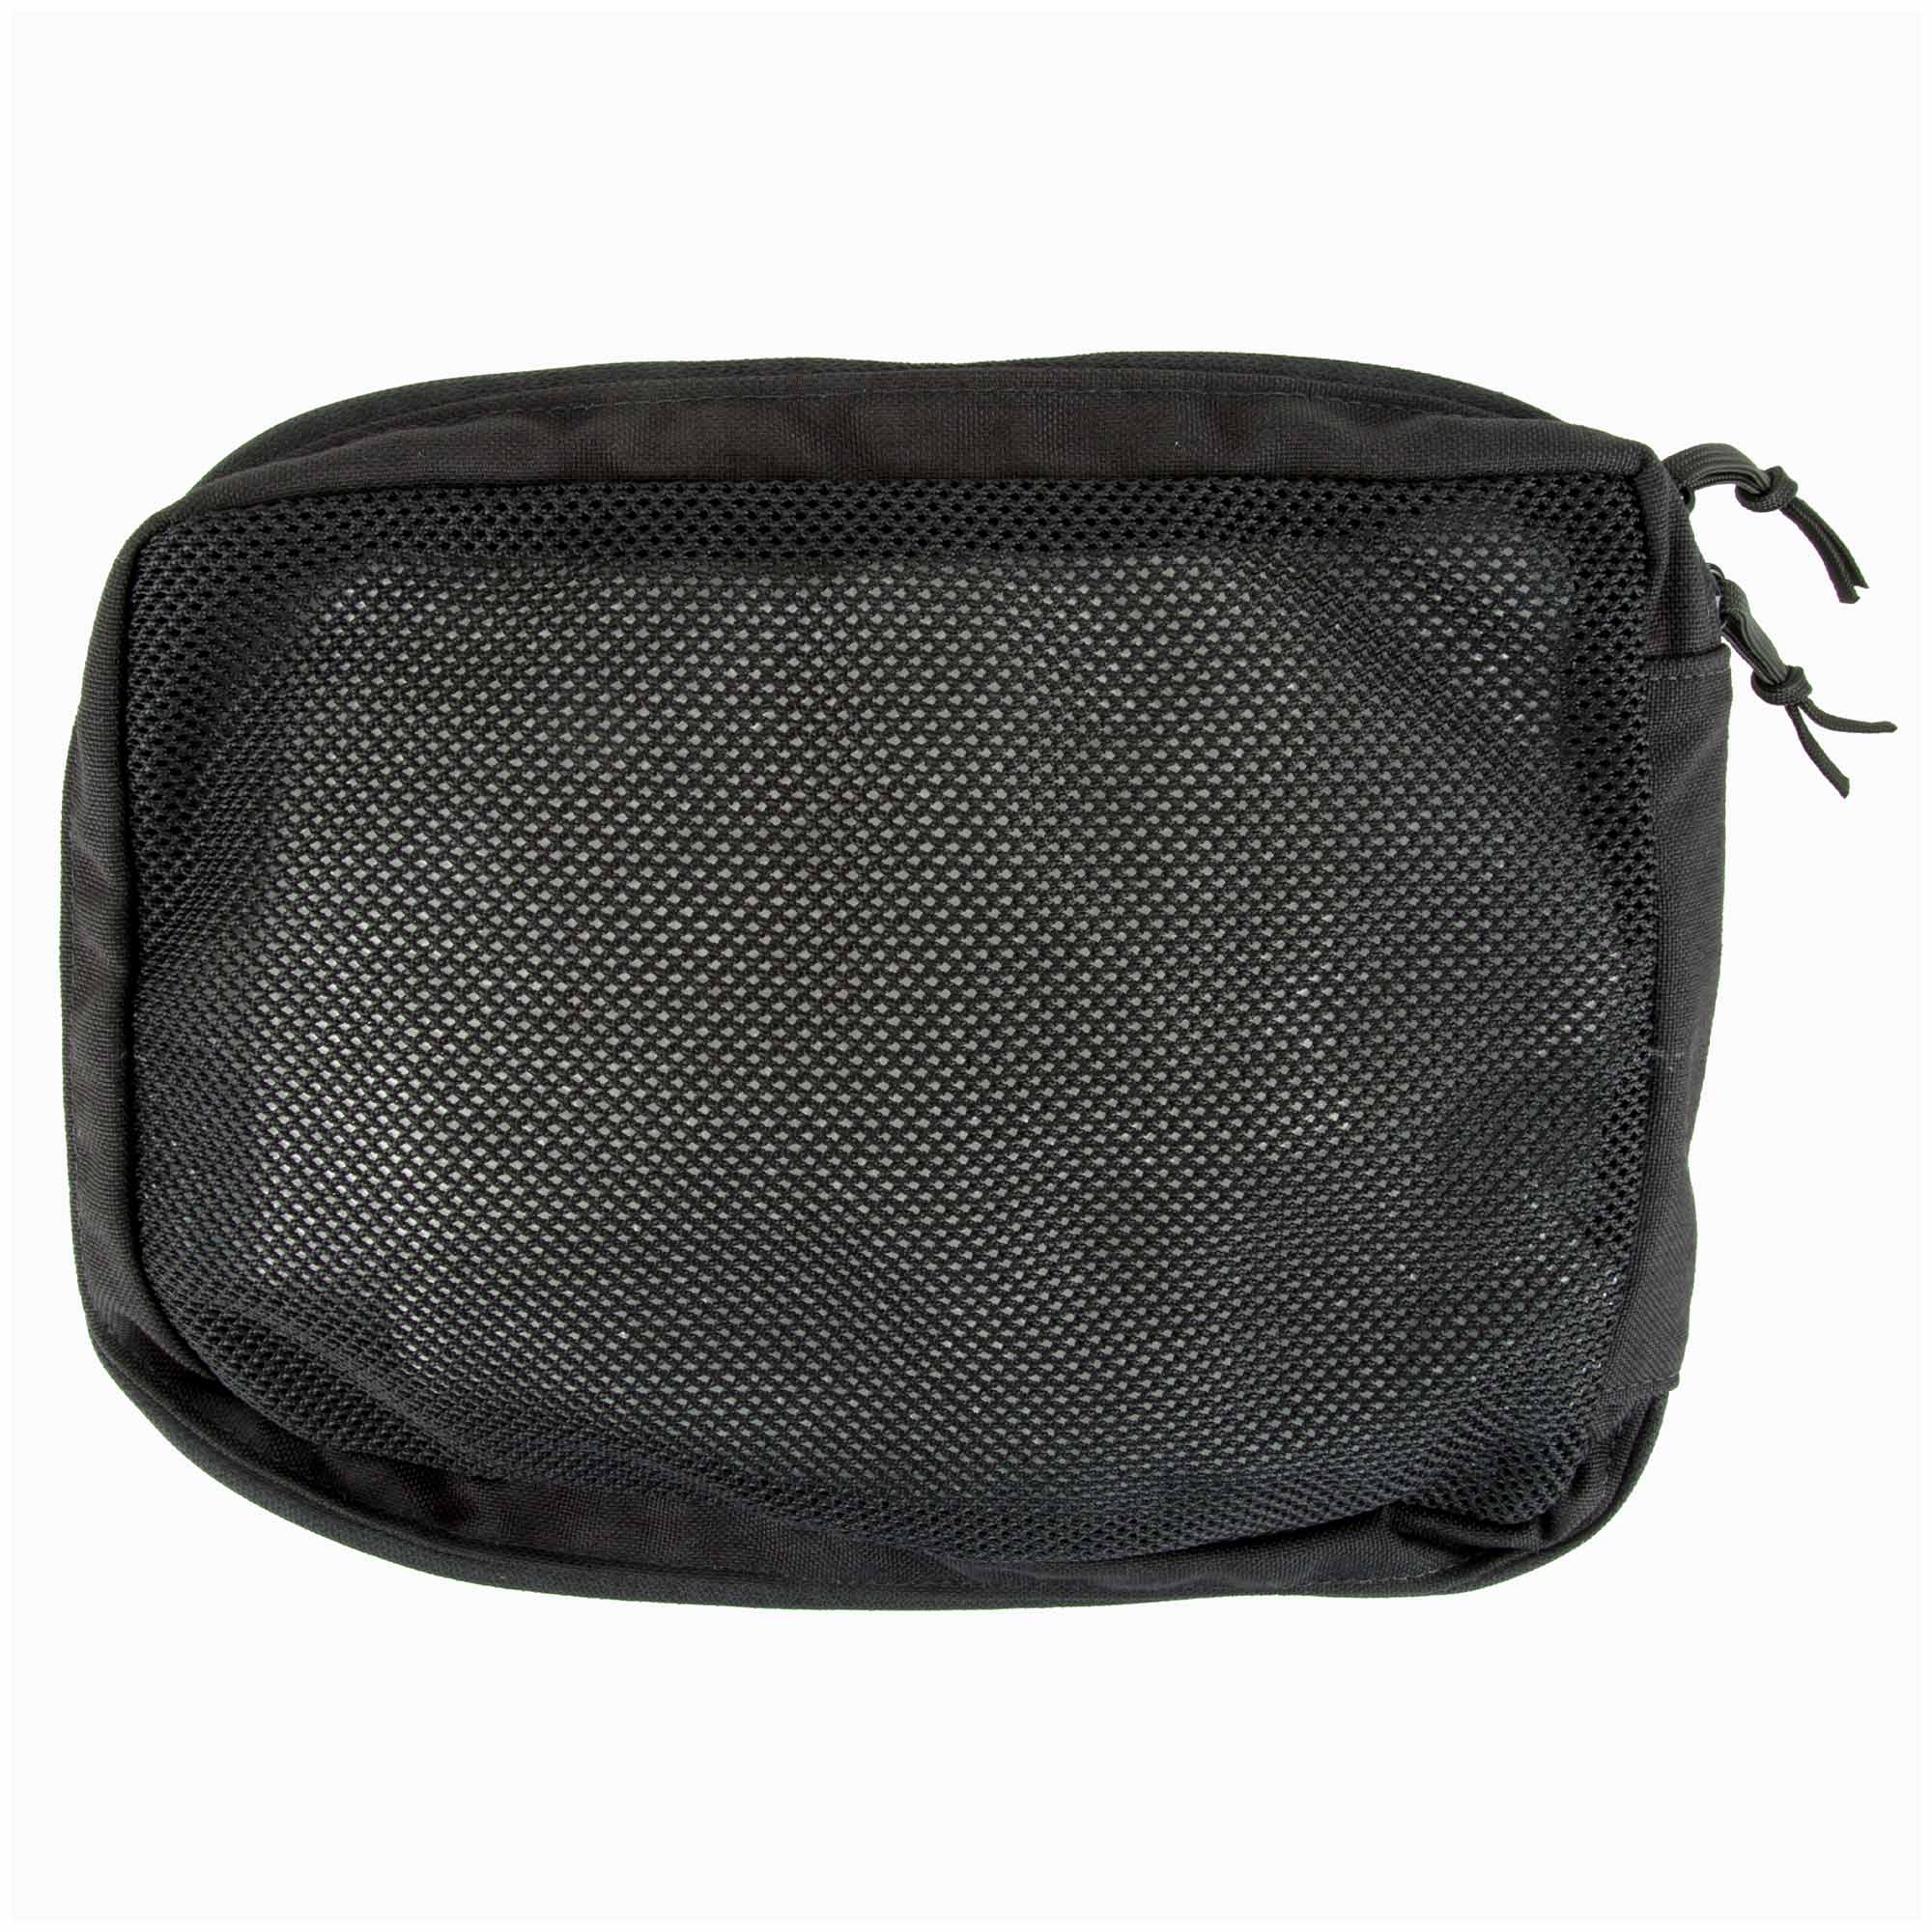 Purchase the LBX Velcro Large Mesh Pouch black by ASMC